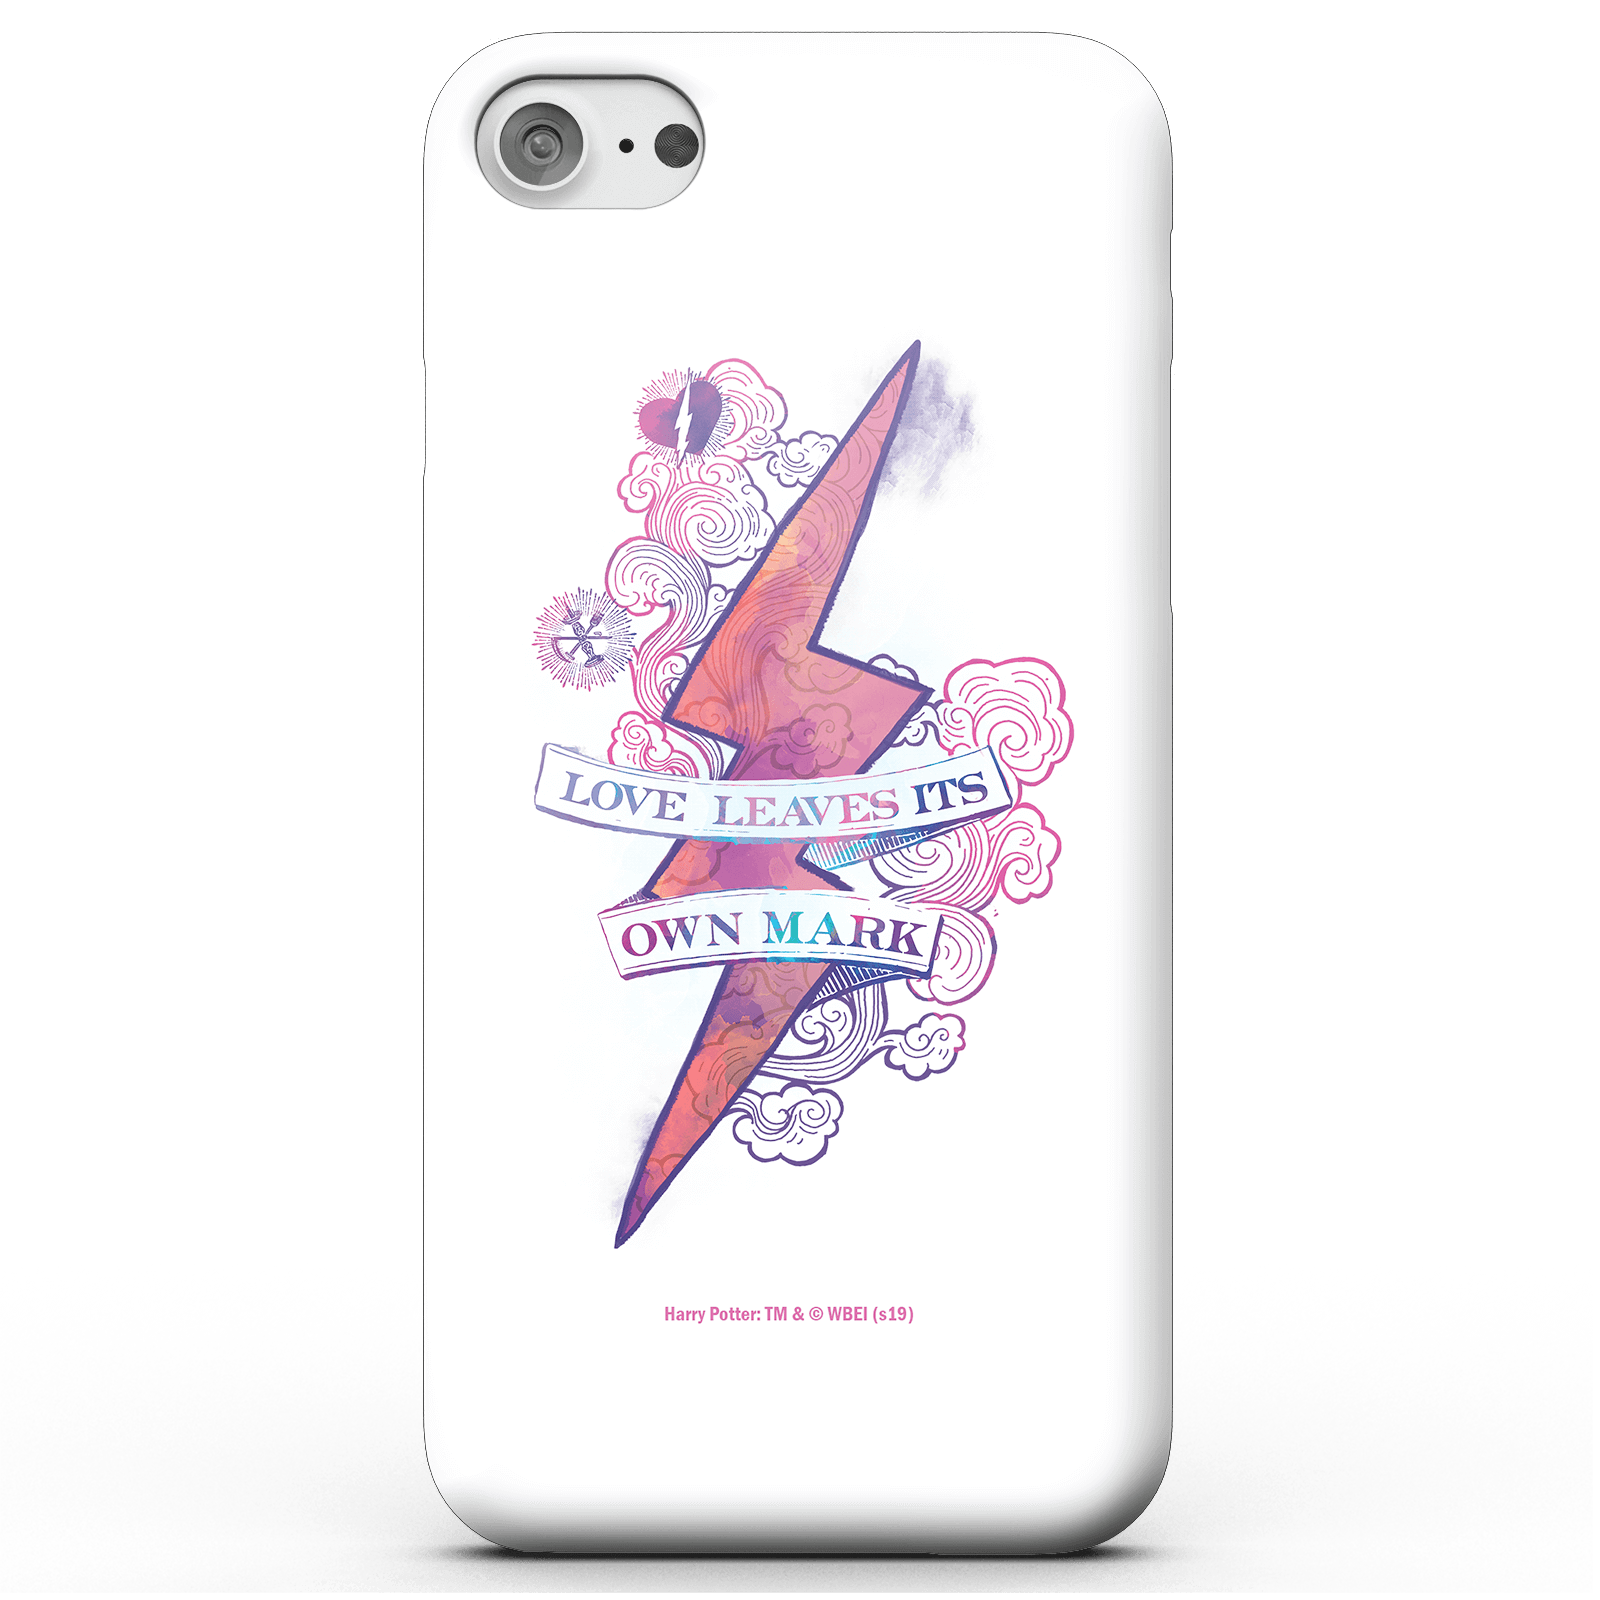 Harry Potter Love Leaves Its Own Mark Phone Case for iPhone and Android - Samsung S8 - Tough Case - Gloss